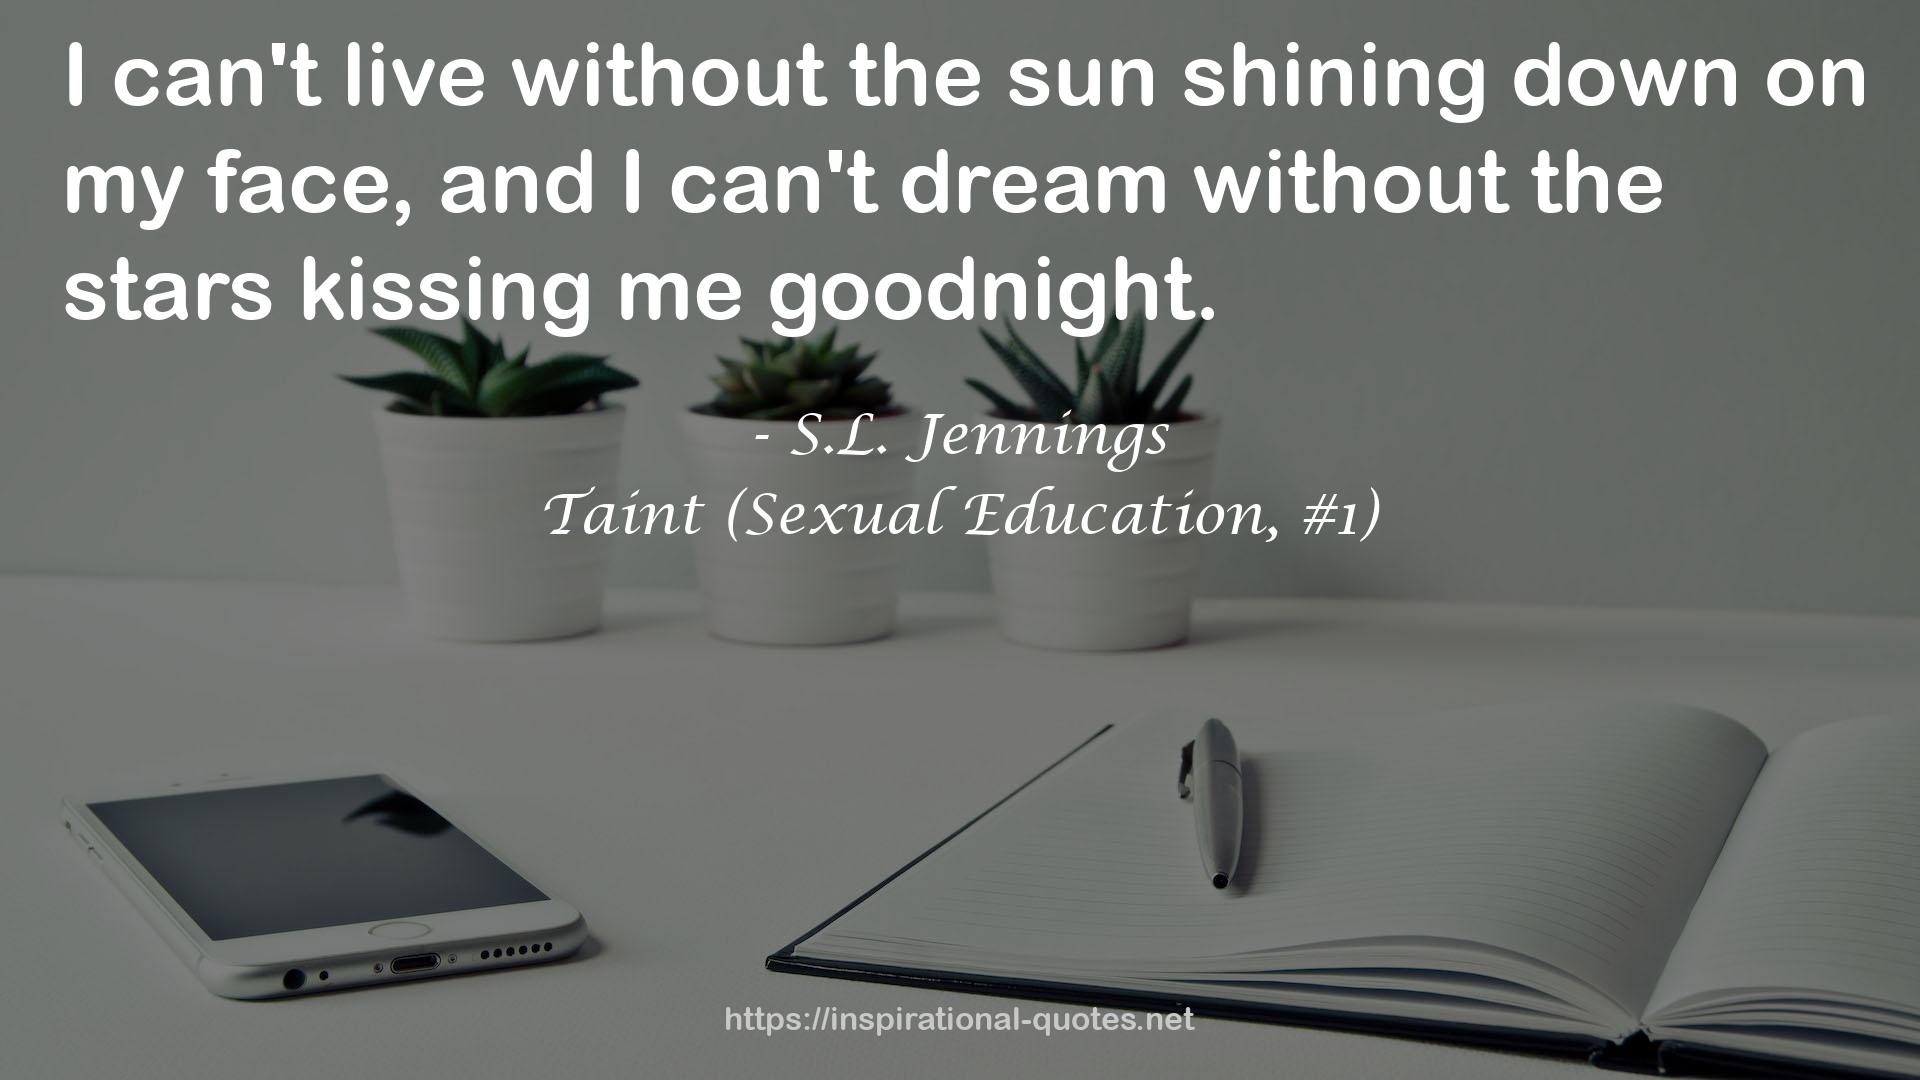 Taint (Sexual Education, #1) QUOTES